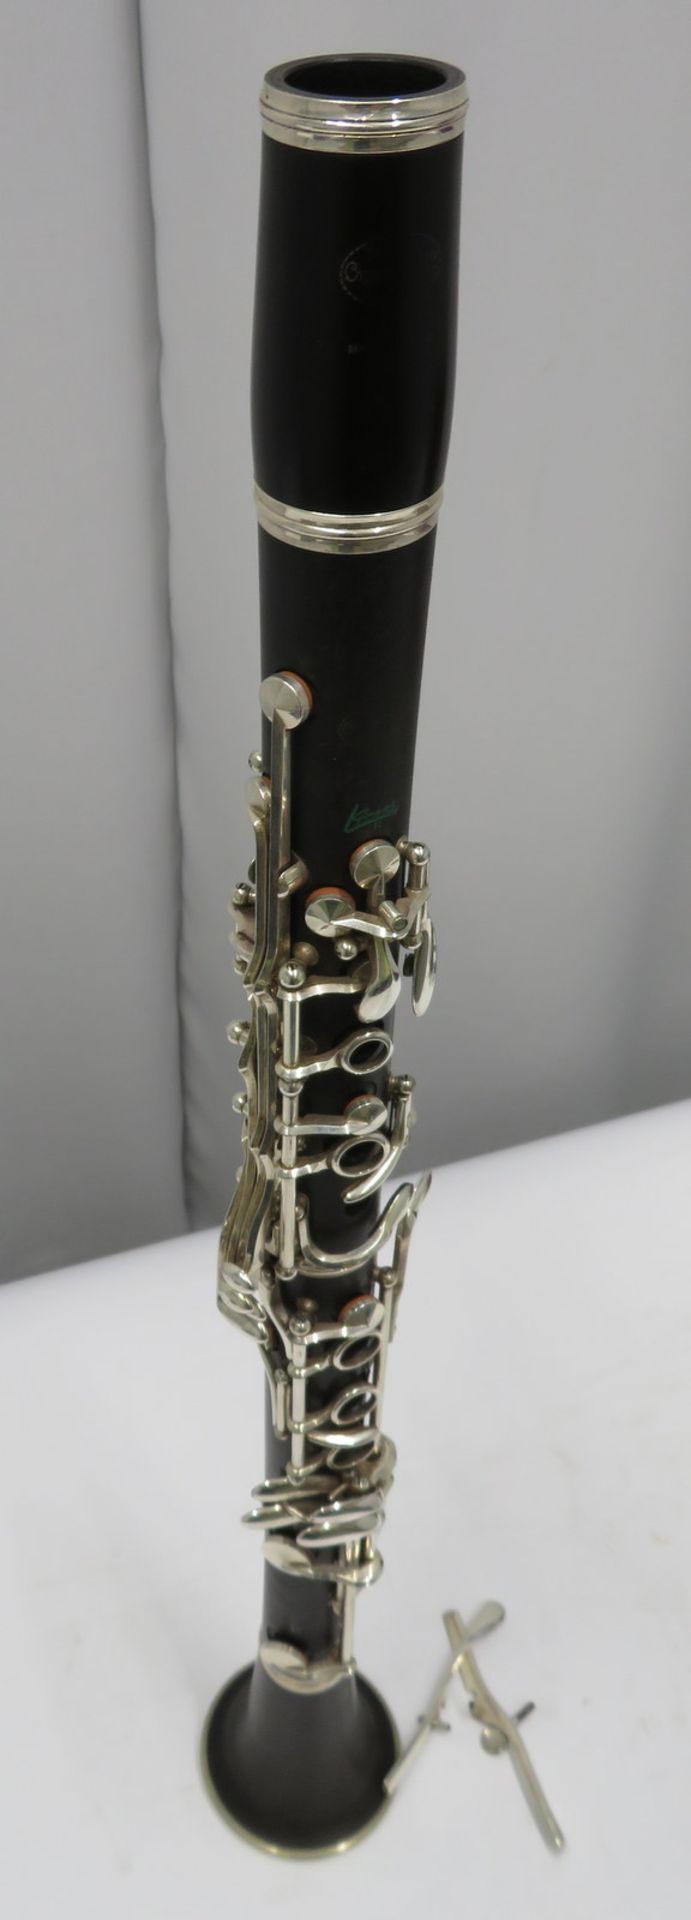 Buffet Crampon L Green clarinet with case. Serial number: 477678. - Image 3 of 19